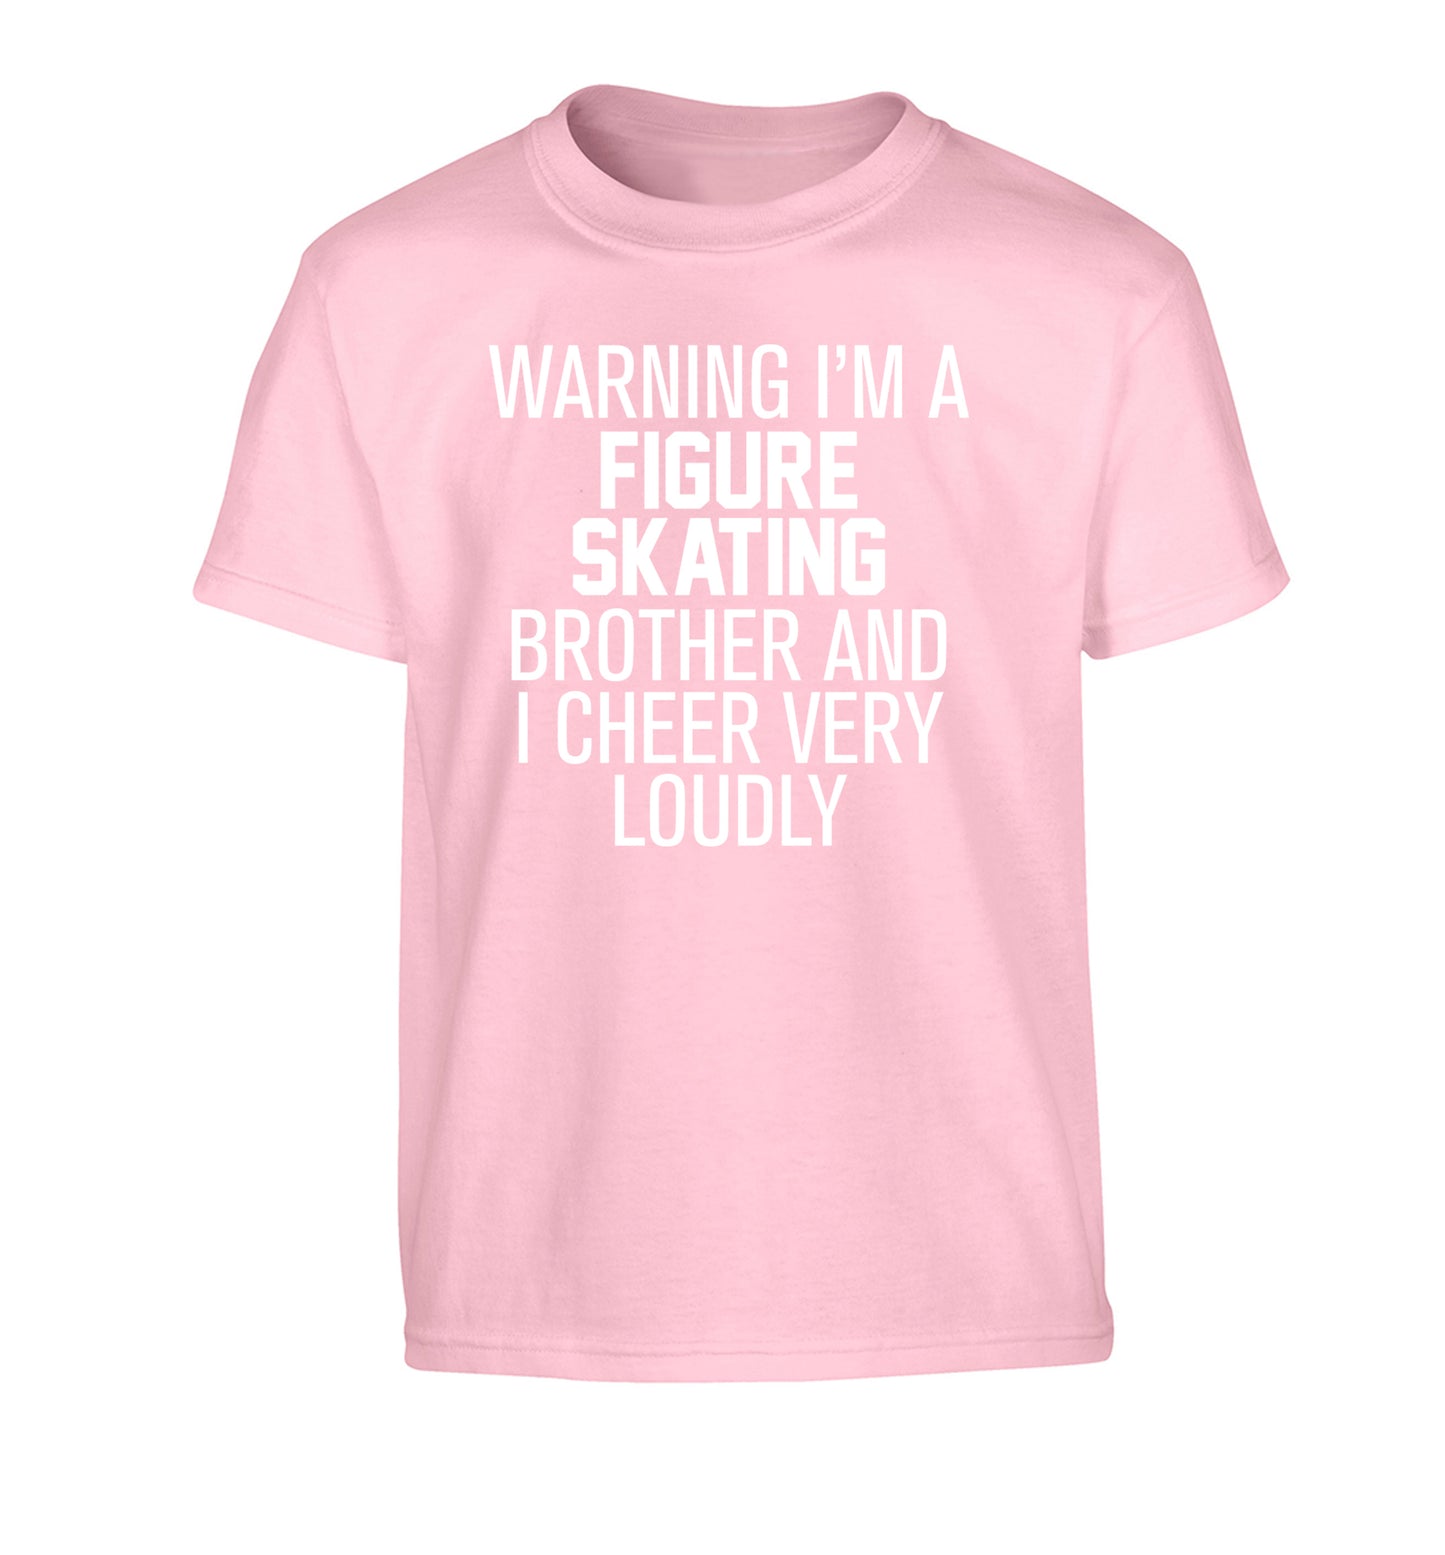 Warning I'm a figure skating brother and I cheer very loudly Children's light pink Tshirt 12-14 Years